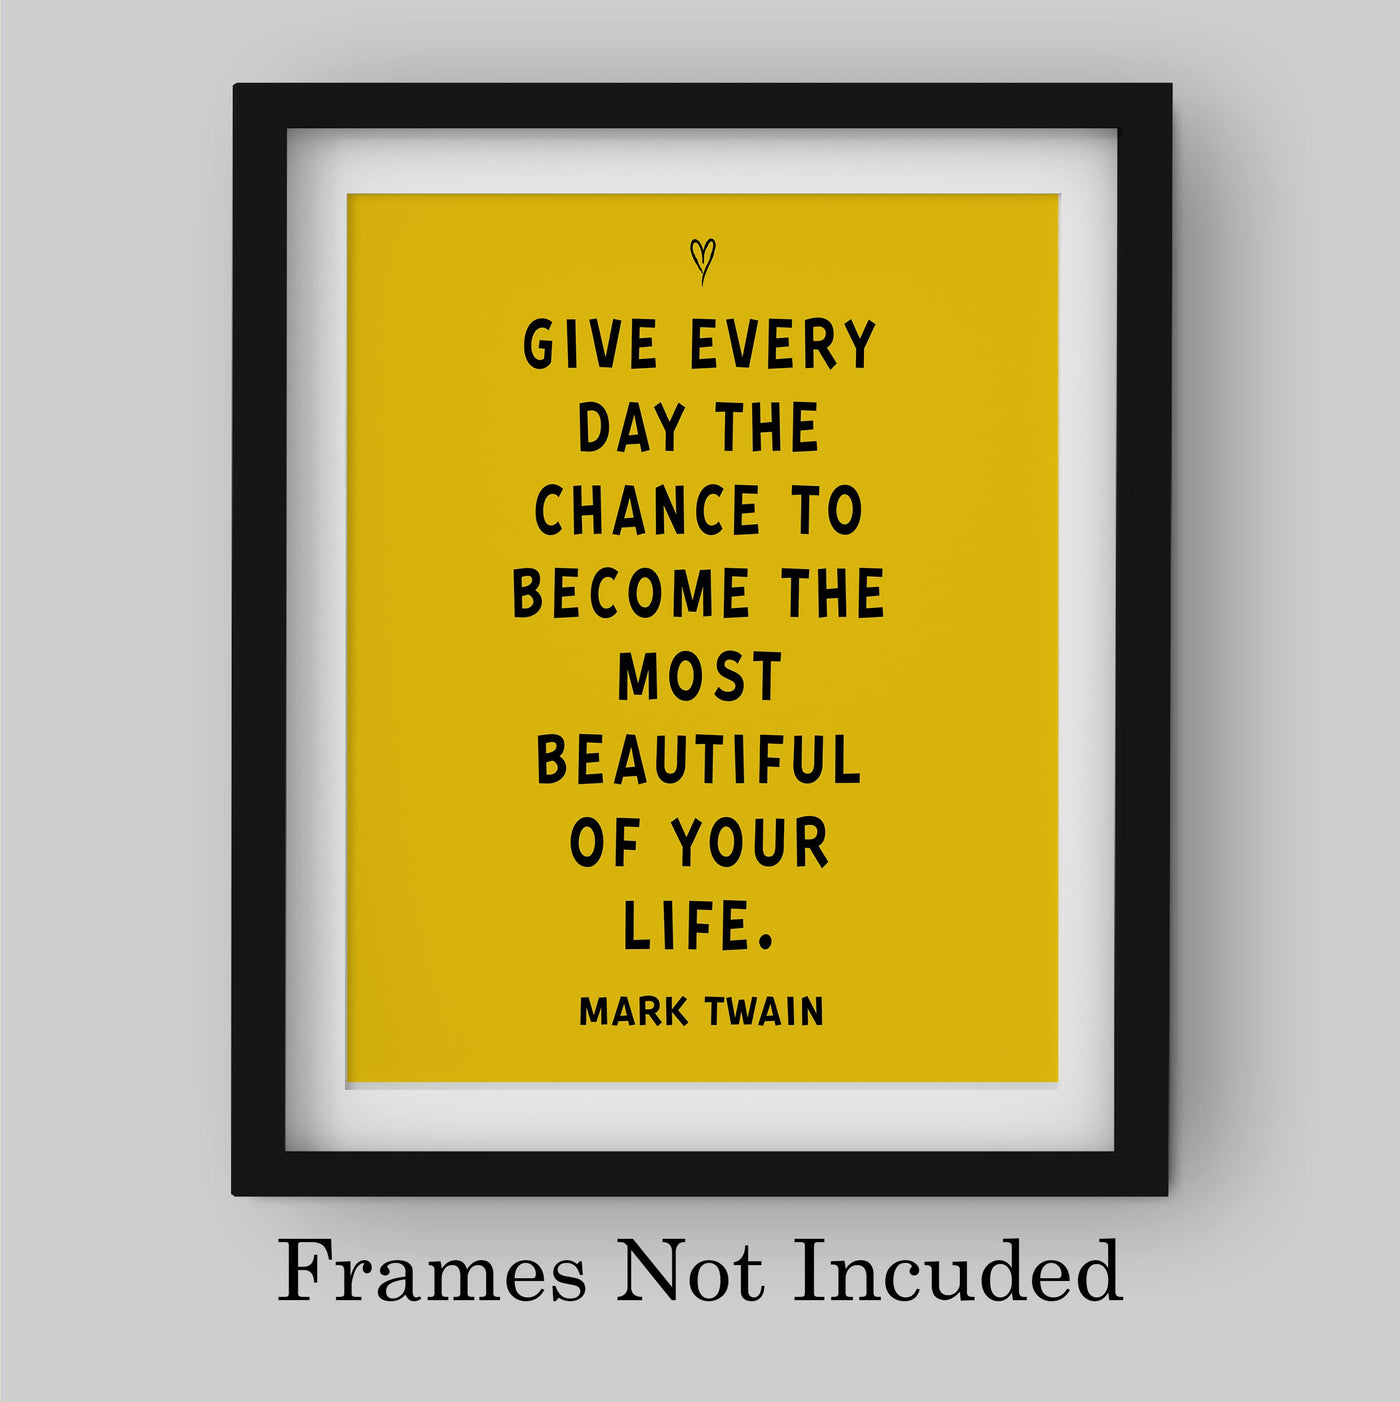 Mark Twain Quotes-"Give Every Day the Chance to Become Beautiful"-Motivational Wall Sign-8 x 10" Typographic Art Print-Ready to Frame. Home-Office-Classroom-Dorm-Cave Decor. Great Inspirational Gift!